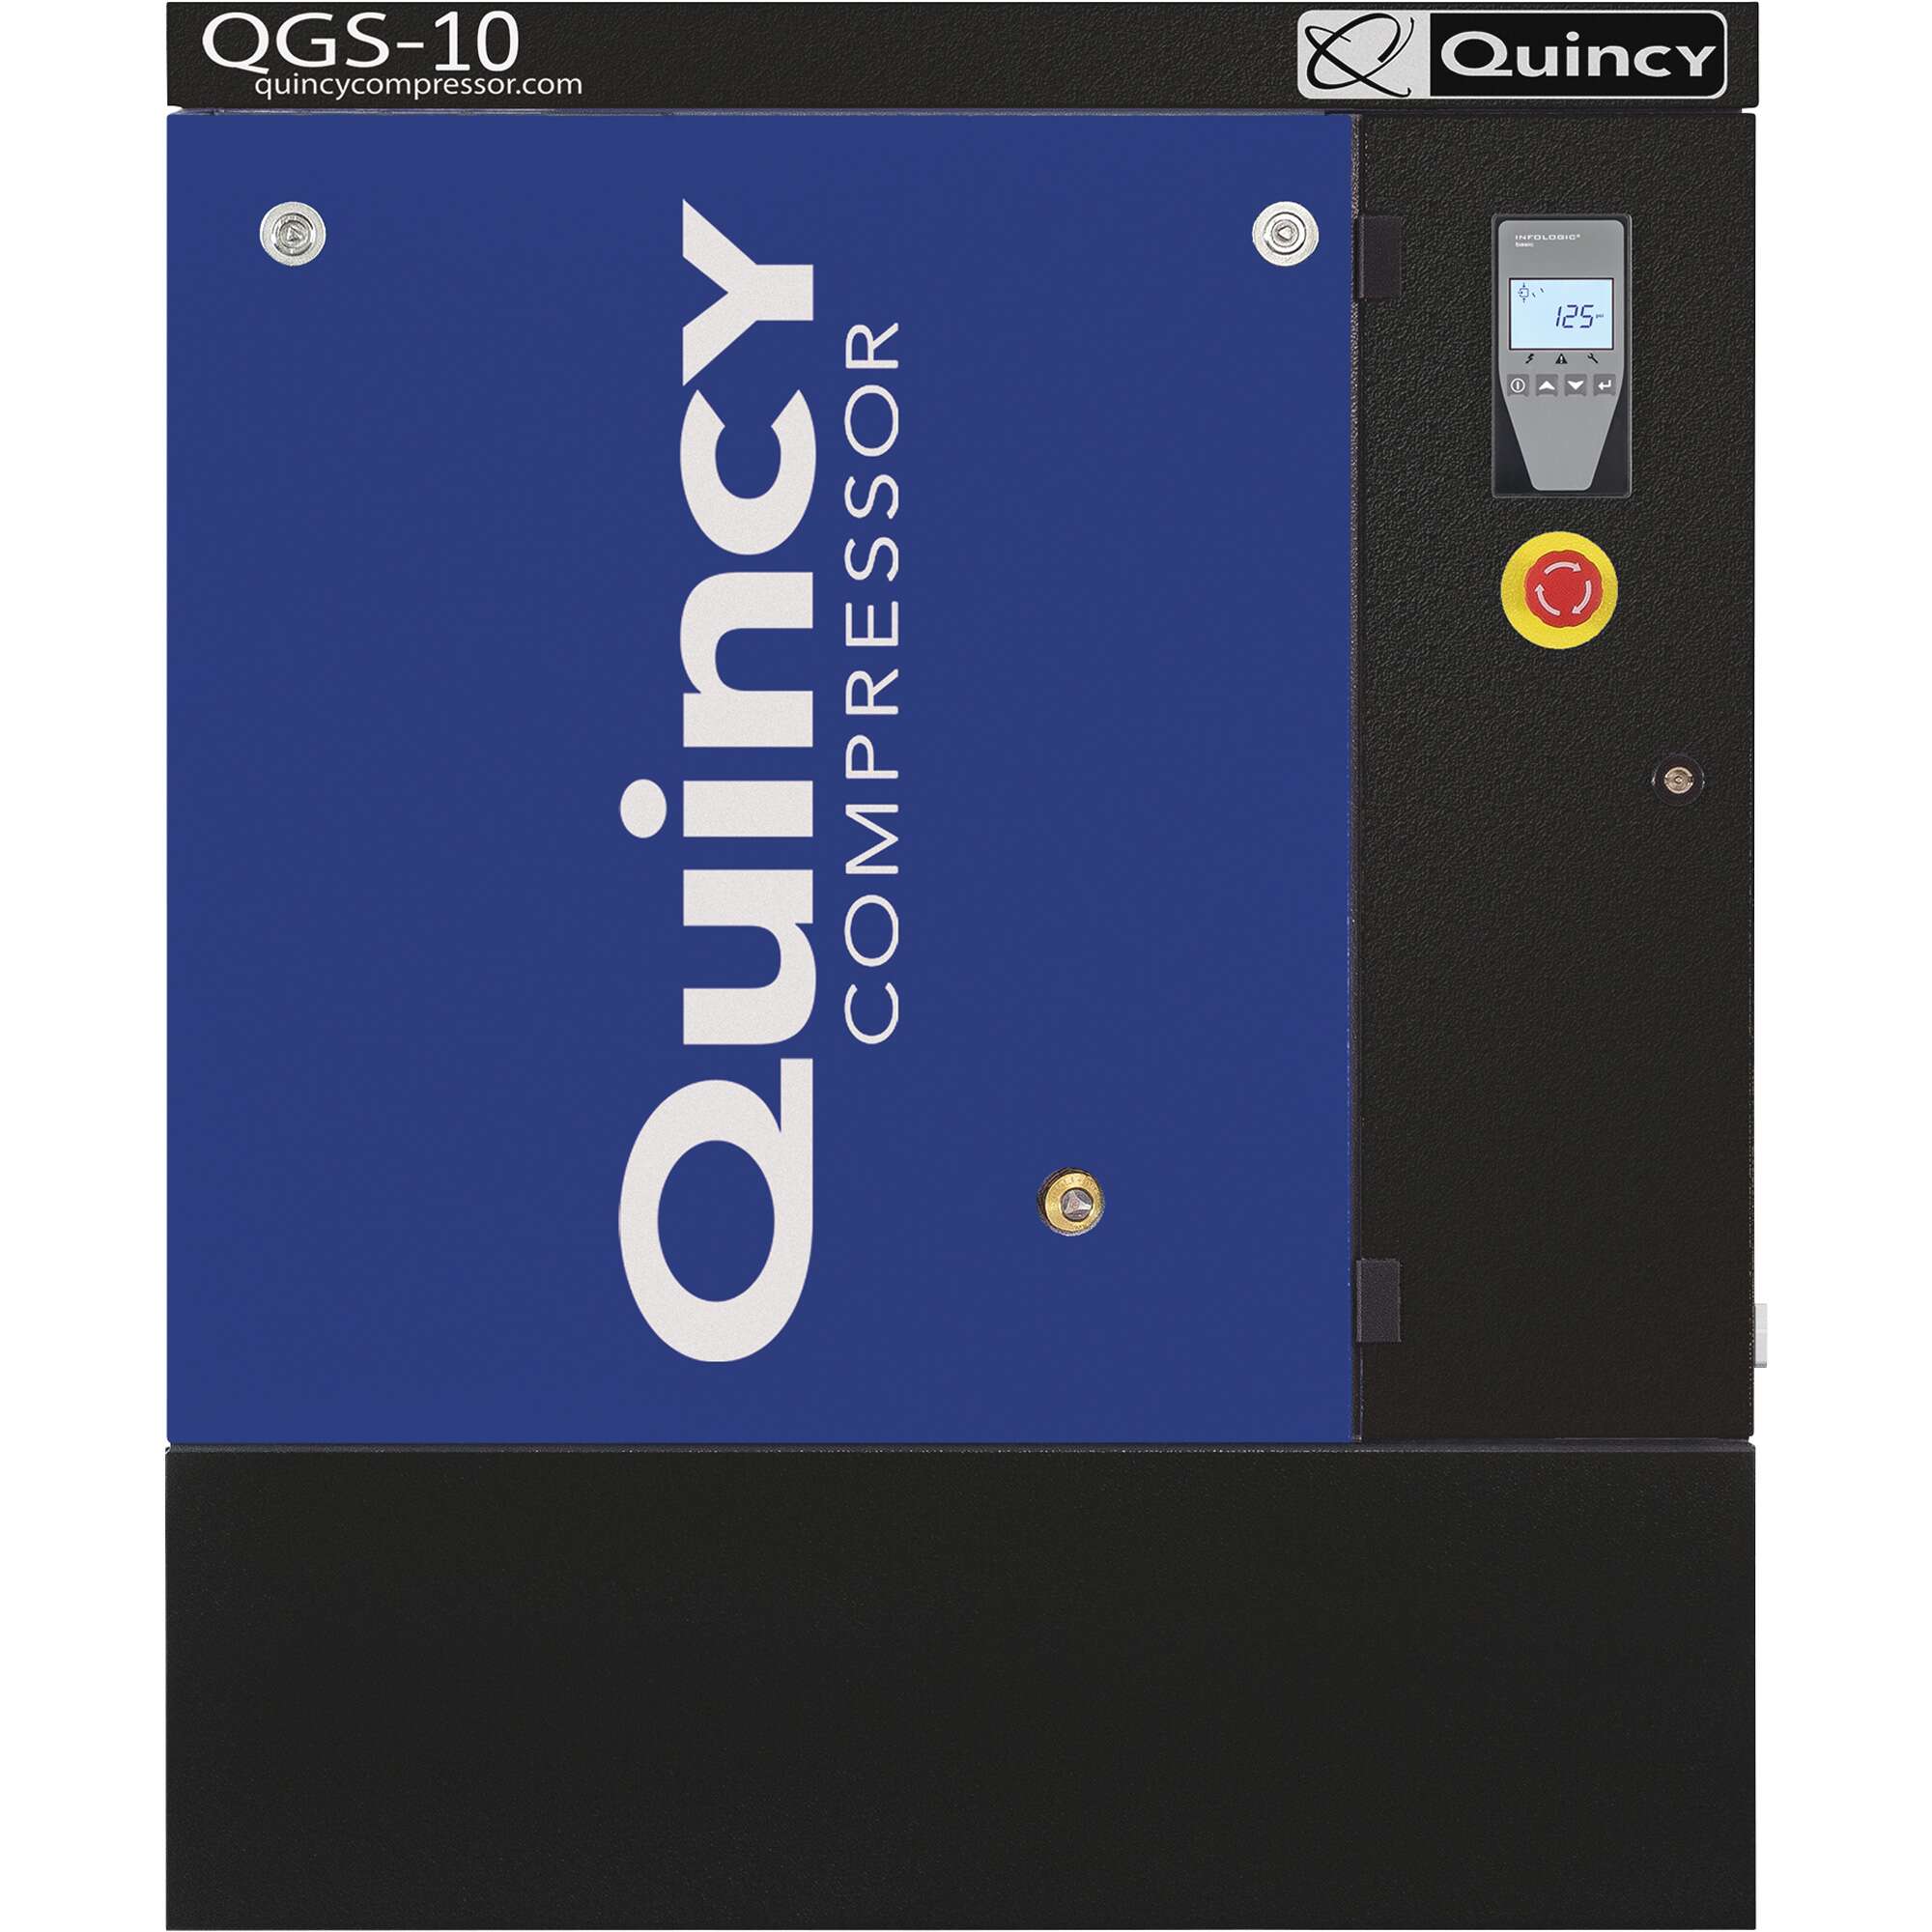 Quincy QGS 10 Rotary Screw Compressor 38.8 CFM at 125 PSI 208 230 460 Volt 3Phase Floor Mount No Dryer